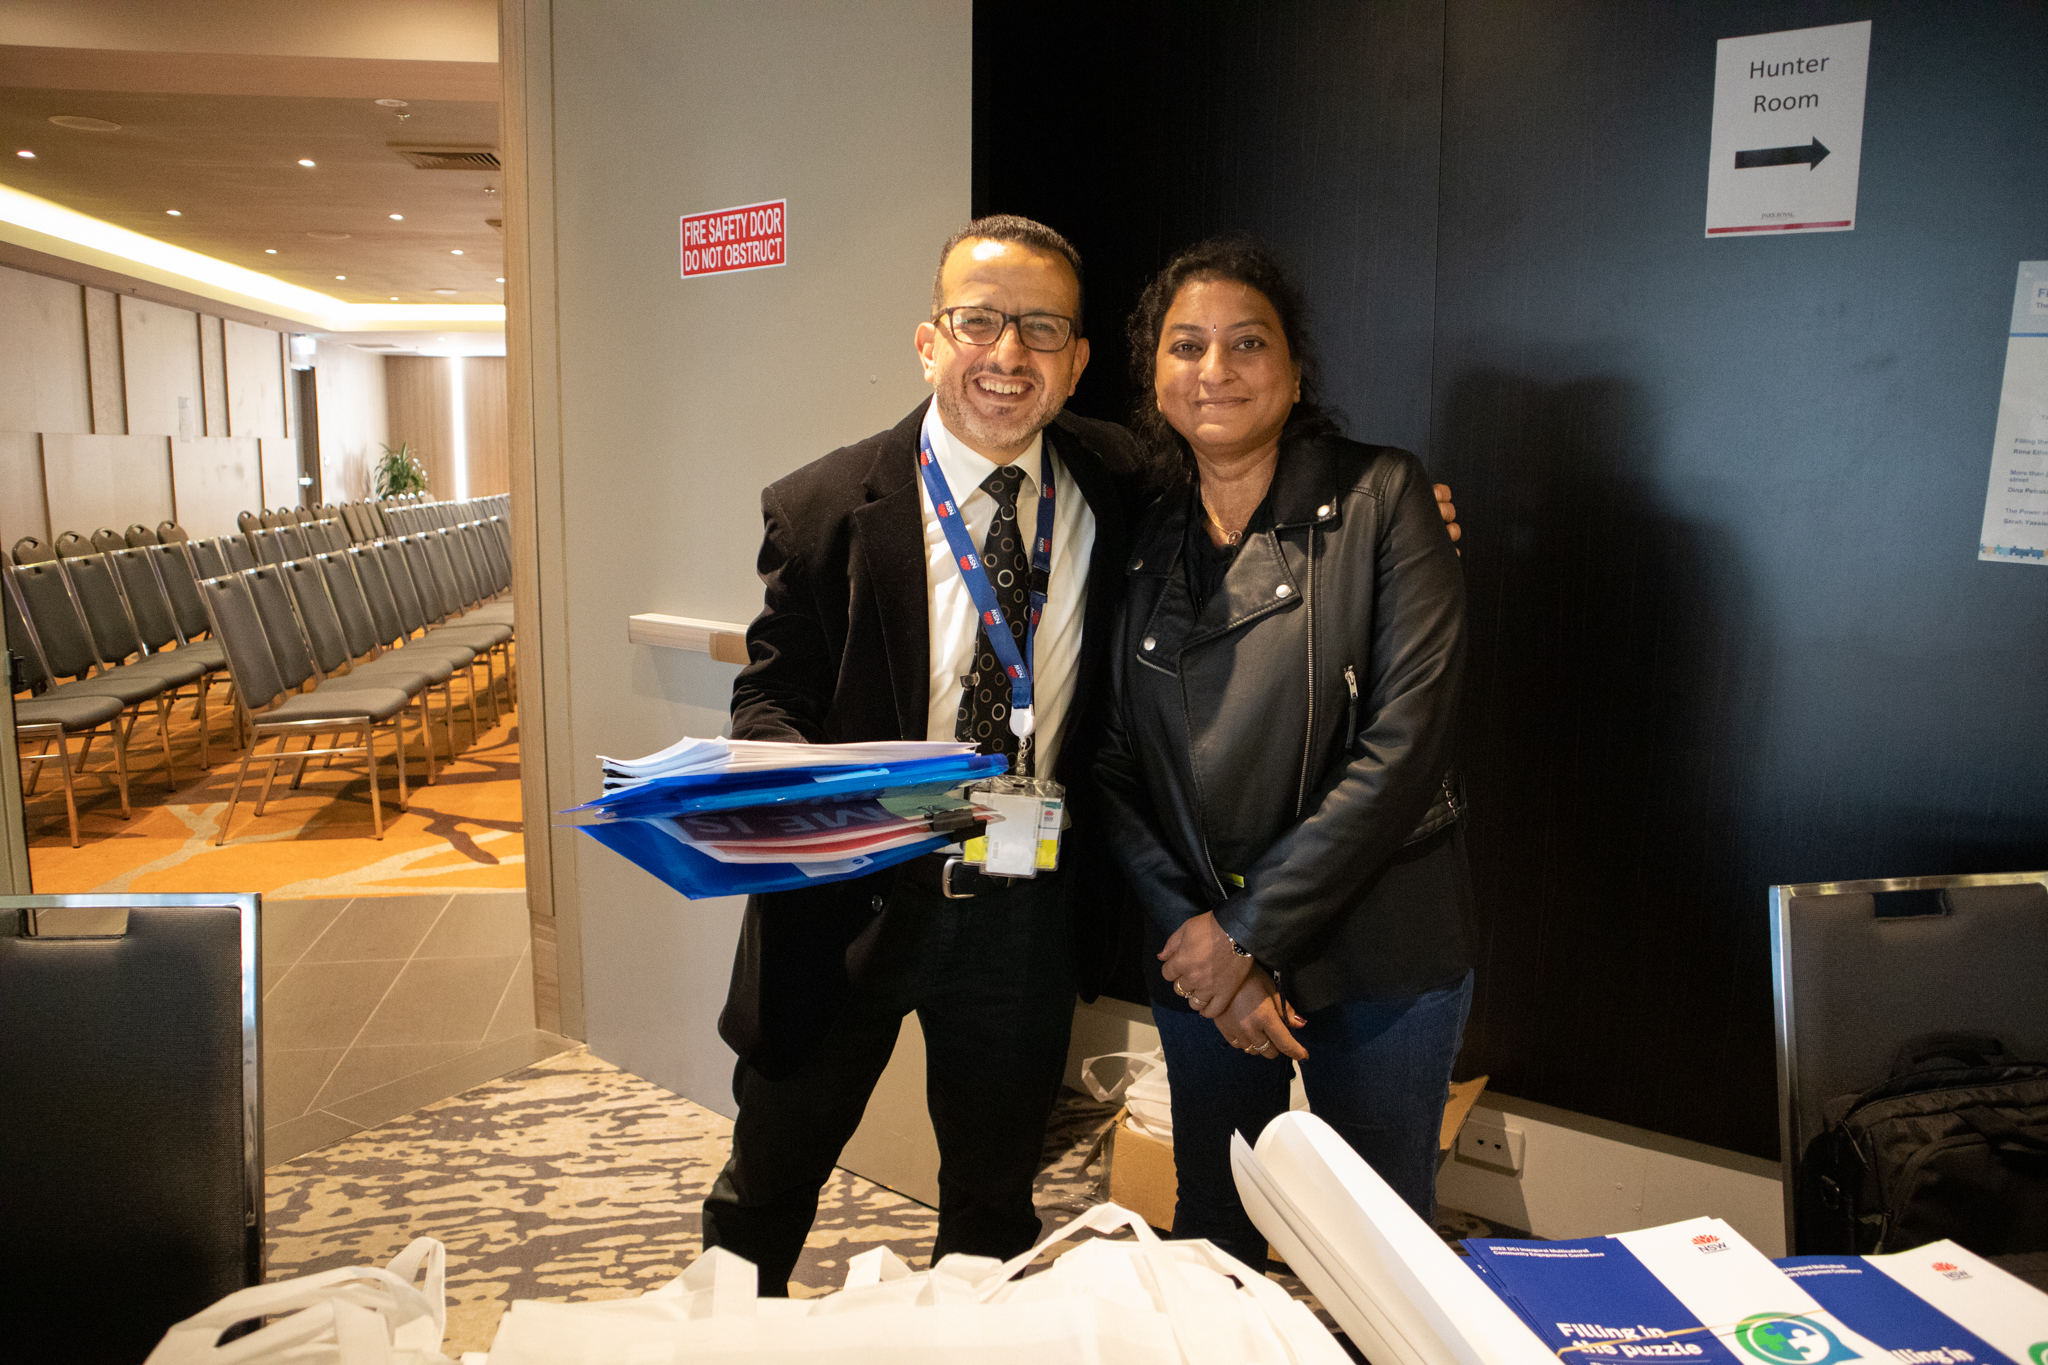 Two people standing closely together behind a conference table, holding a handful of folders, and smiling at the camera.